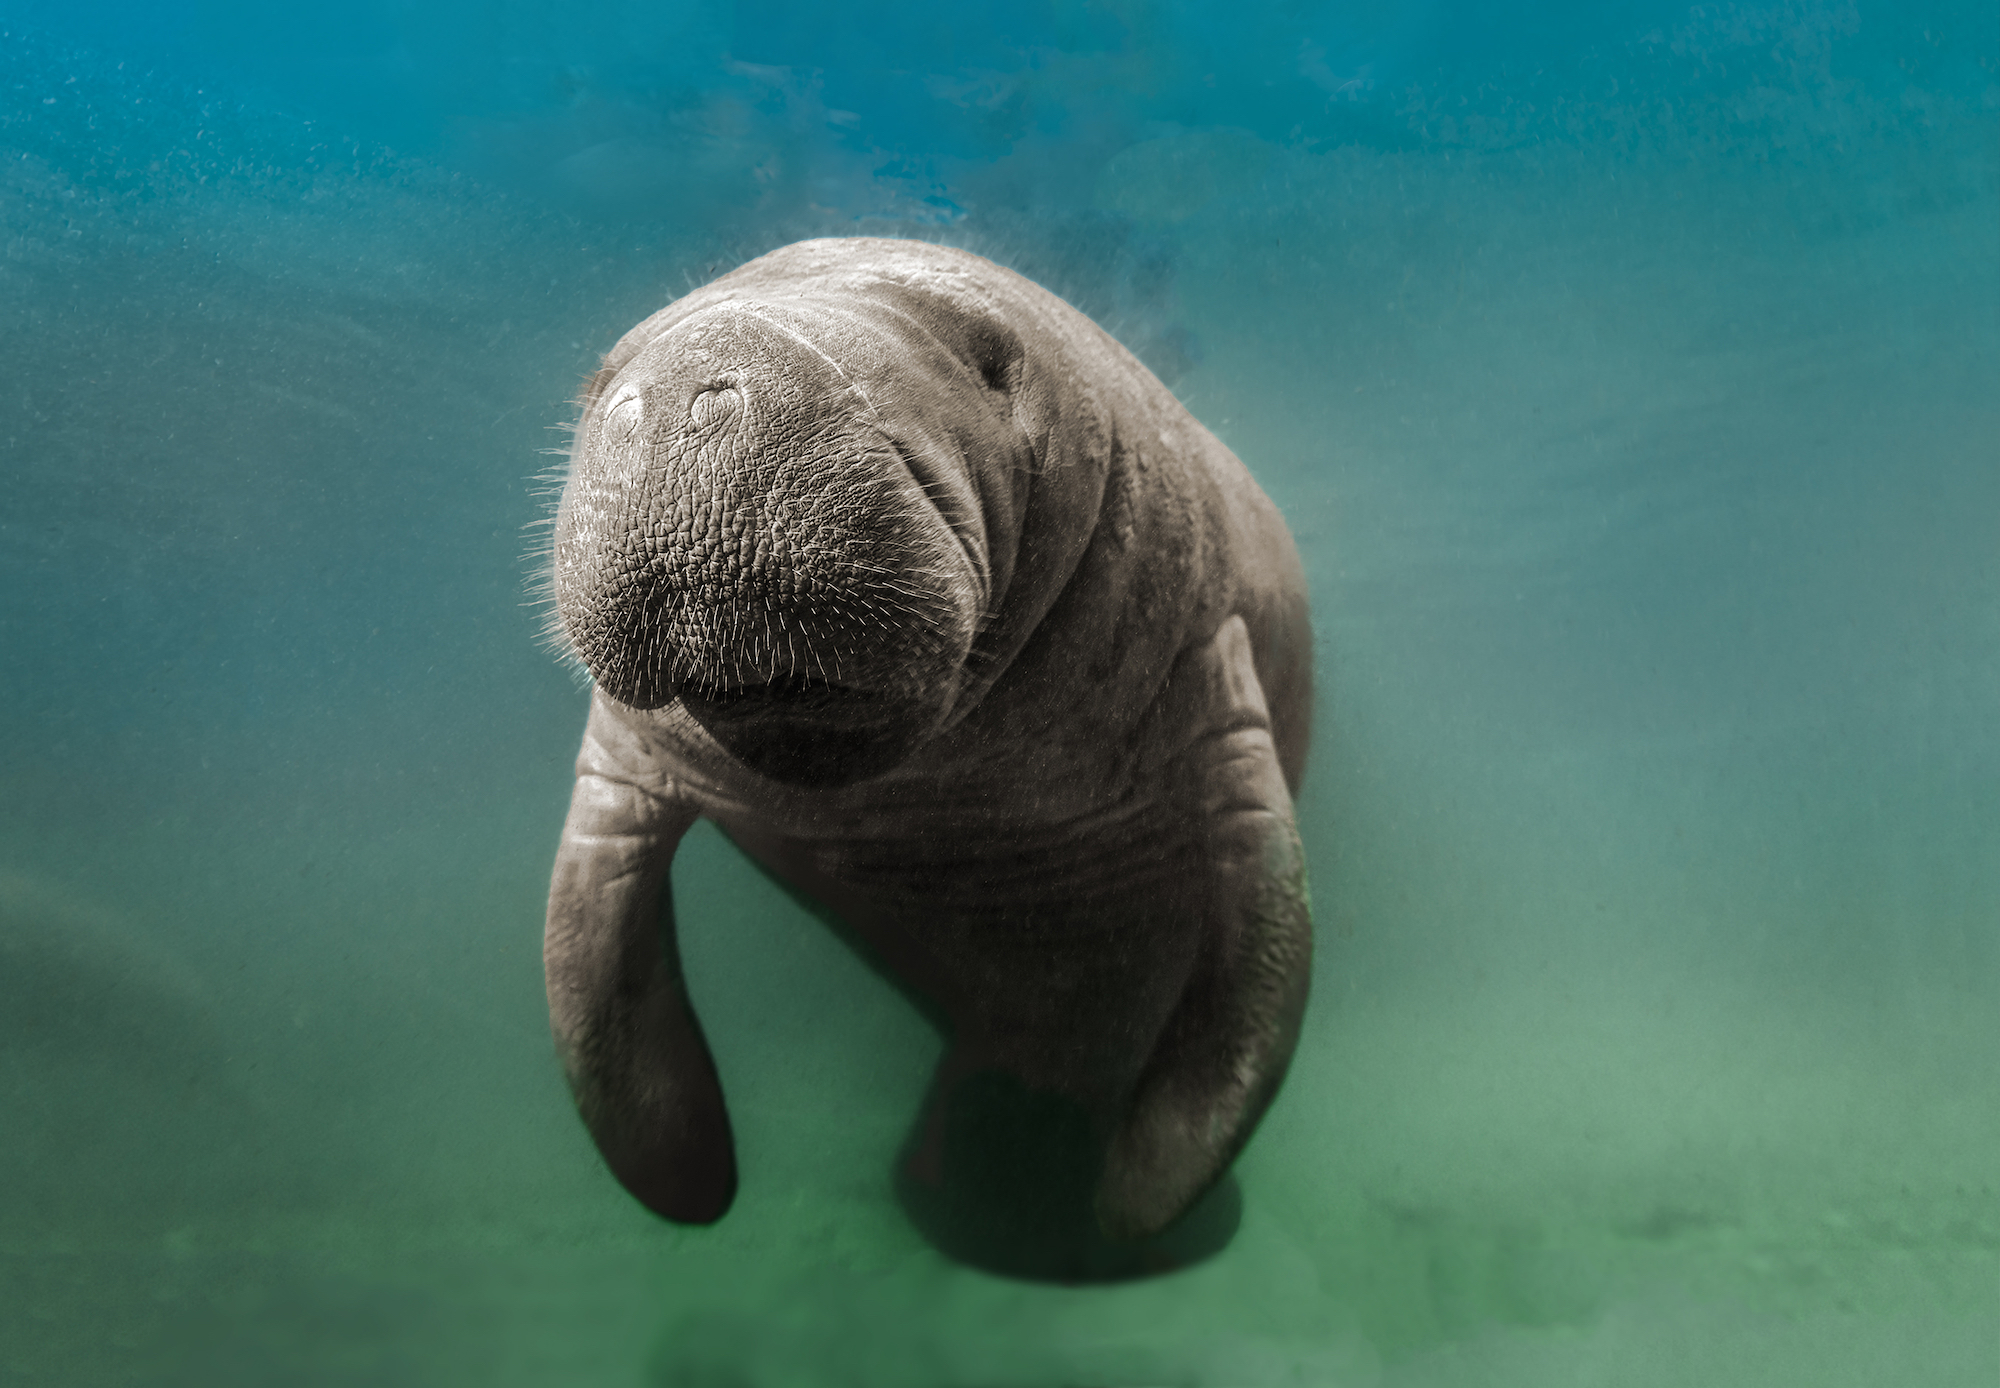 A manatee in Crystal River, Florida, one of the best scuba diving destinations in the world during the colder January months